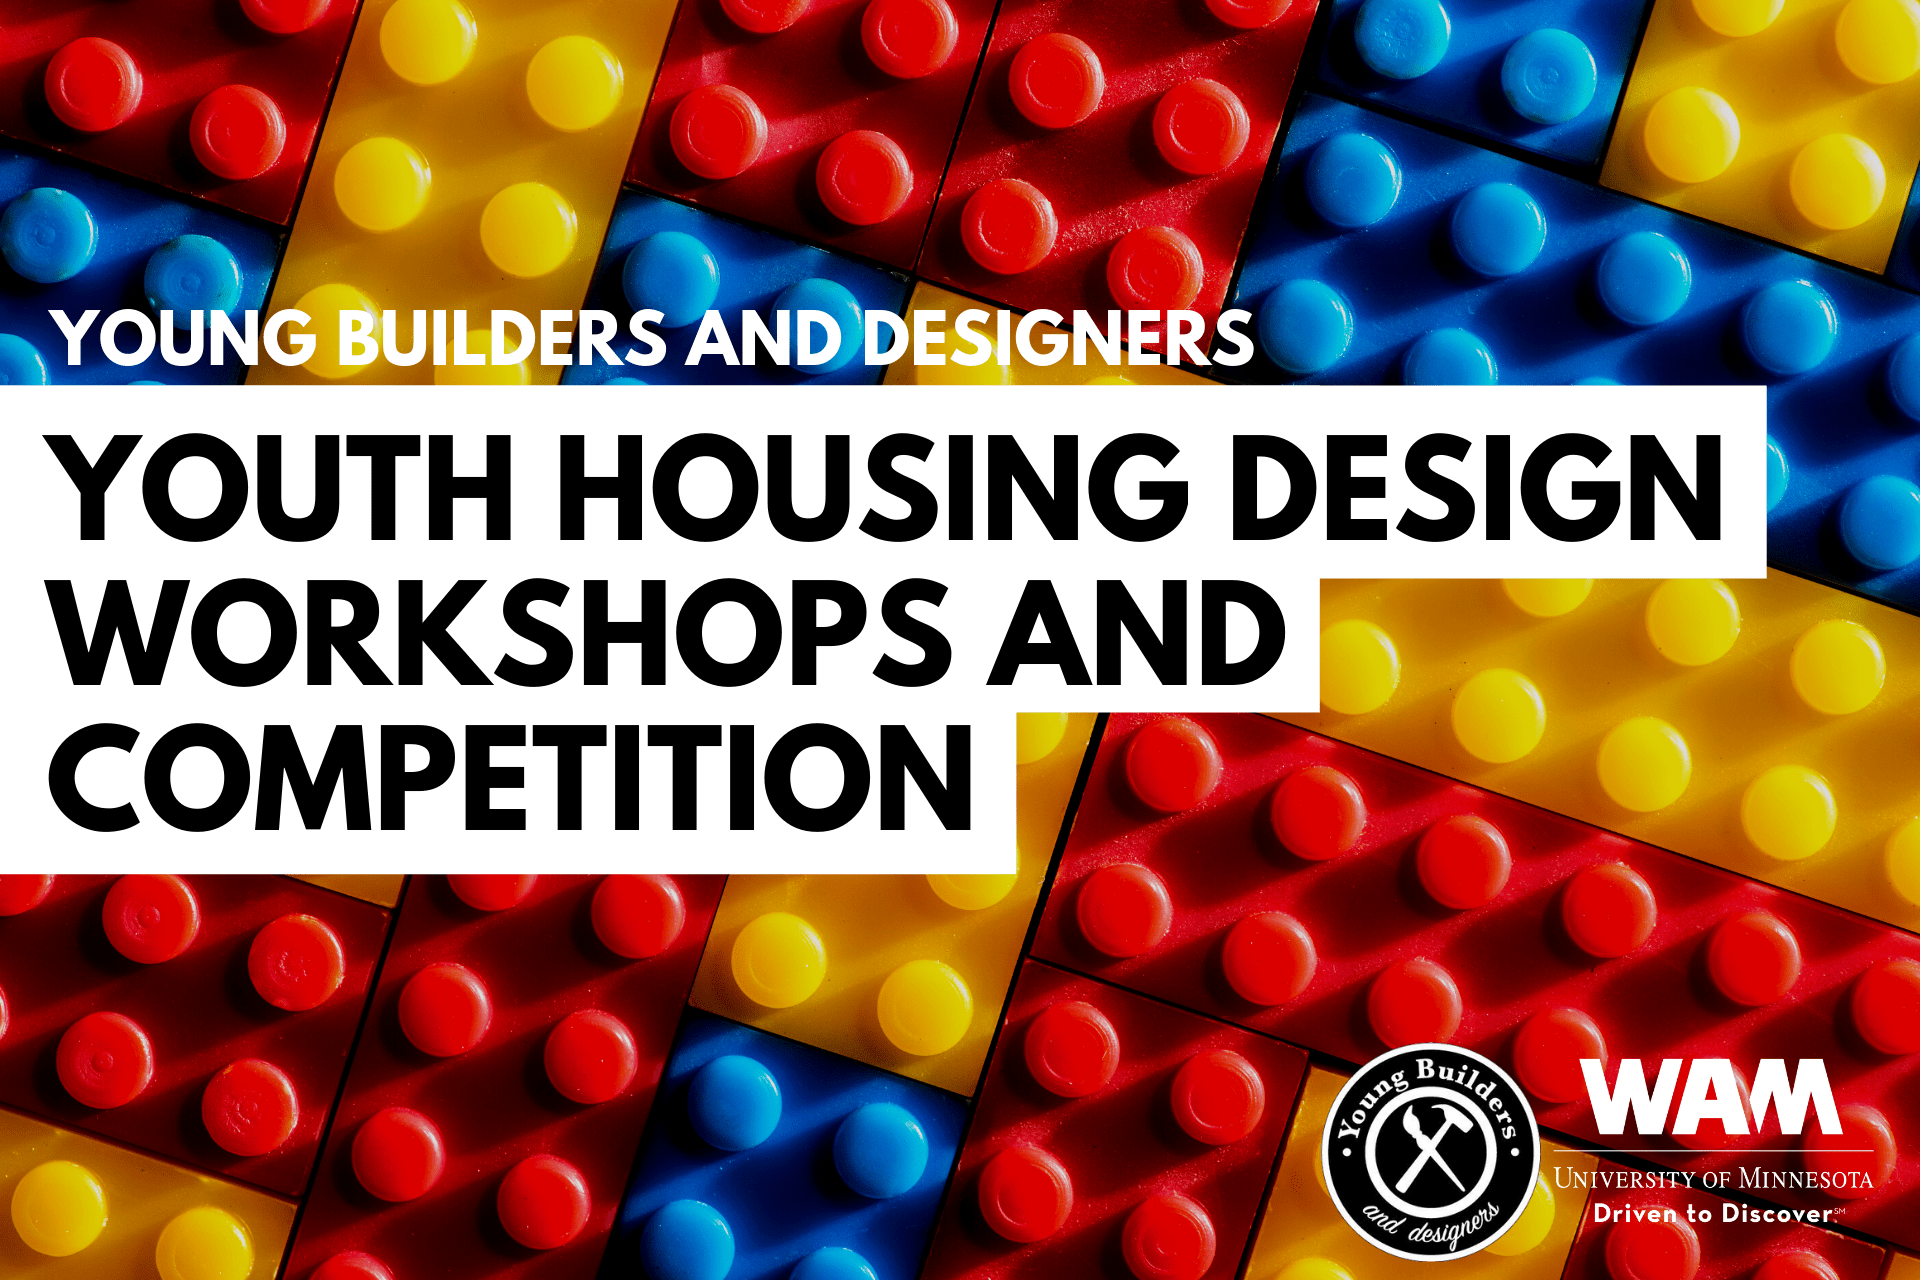 'Youth Housing Design' over multicolored legos